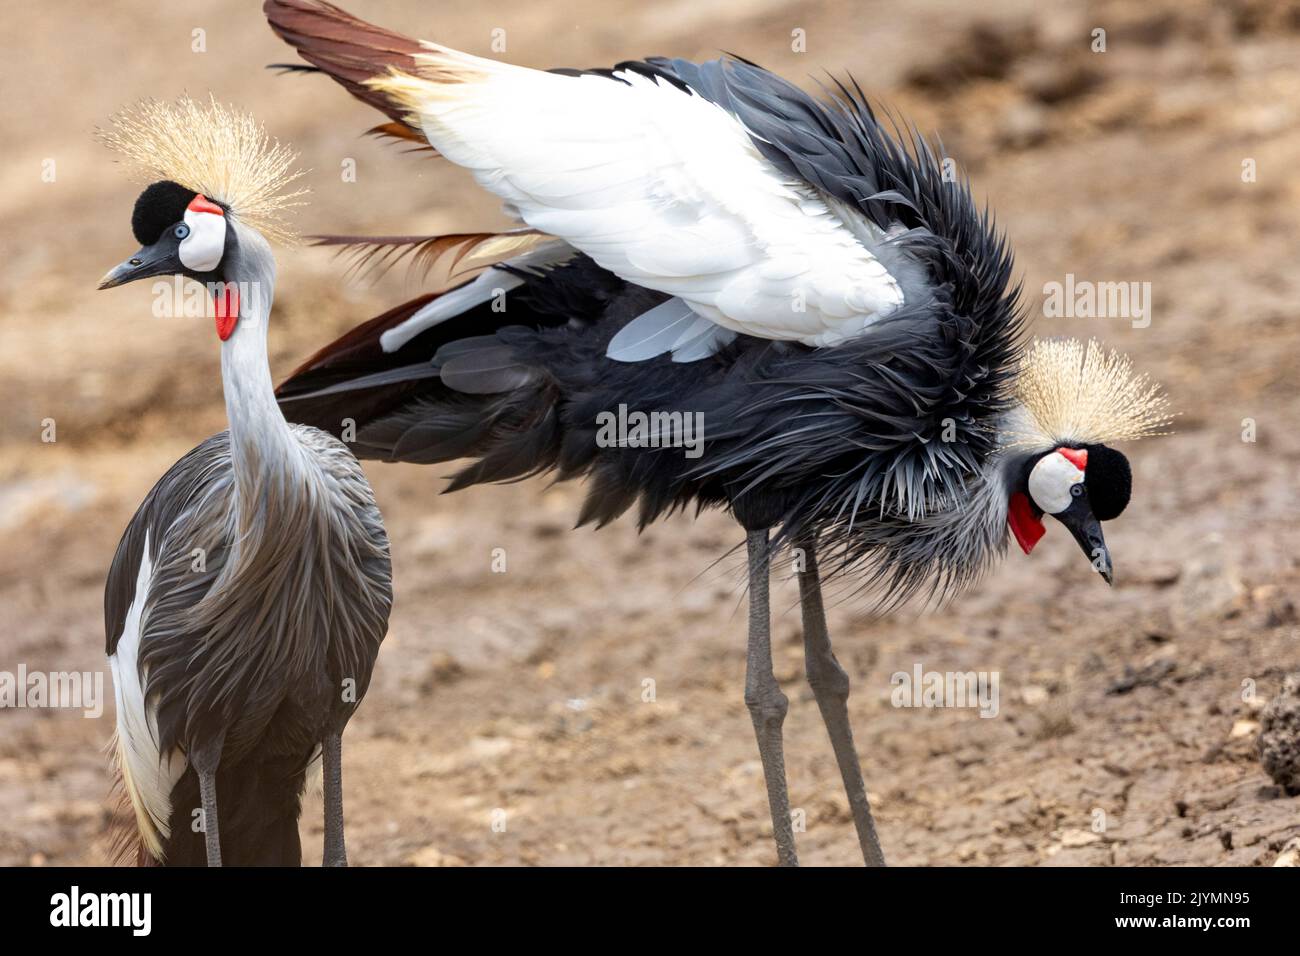 Black crowned crane (Balearica pavonina), foraging for food in a swamp, Masai Mara National Reserve, National Park, Kenya, East Africa Africa Stock Photo